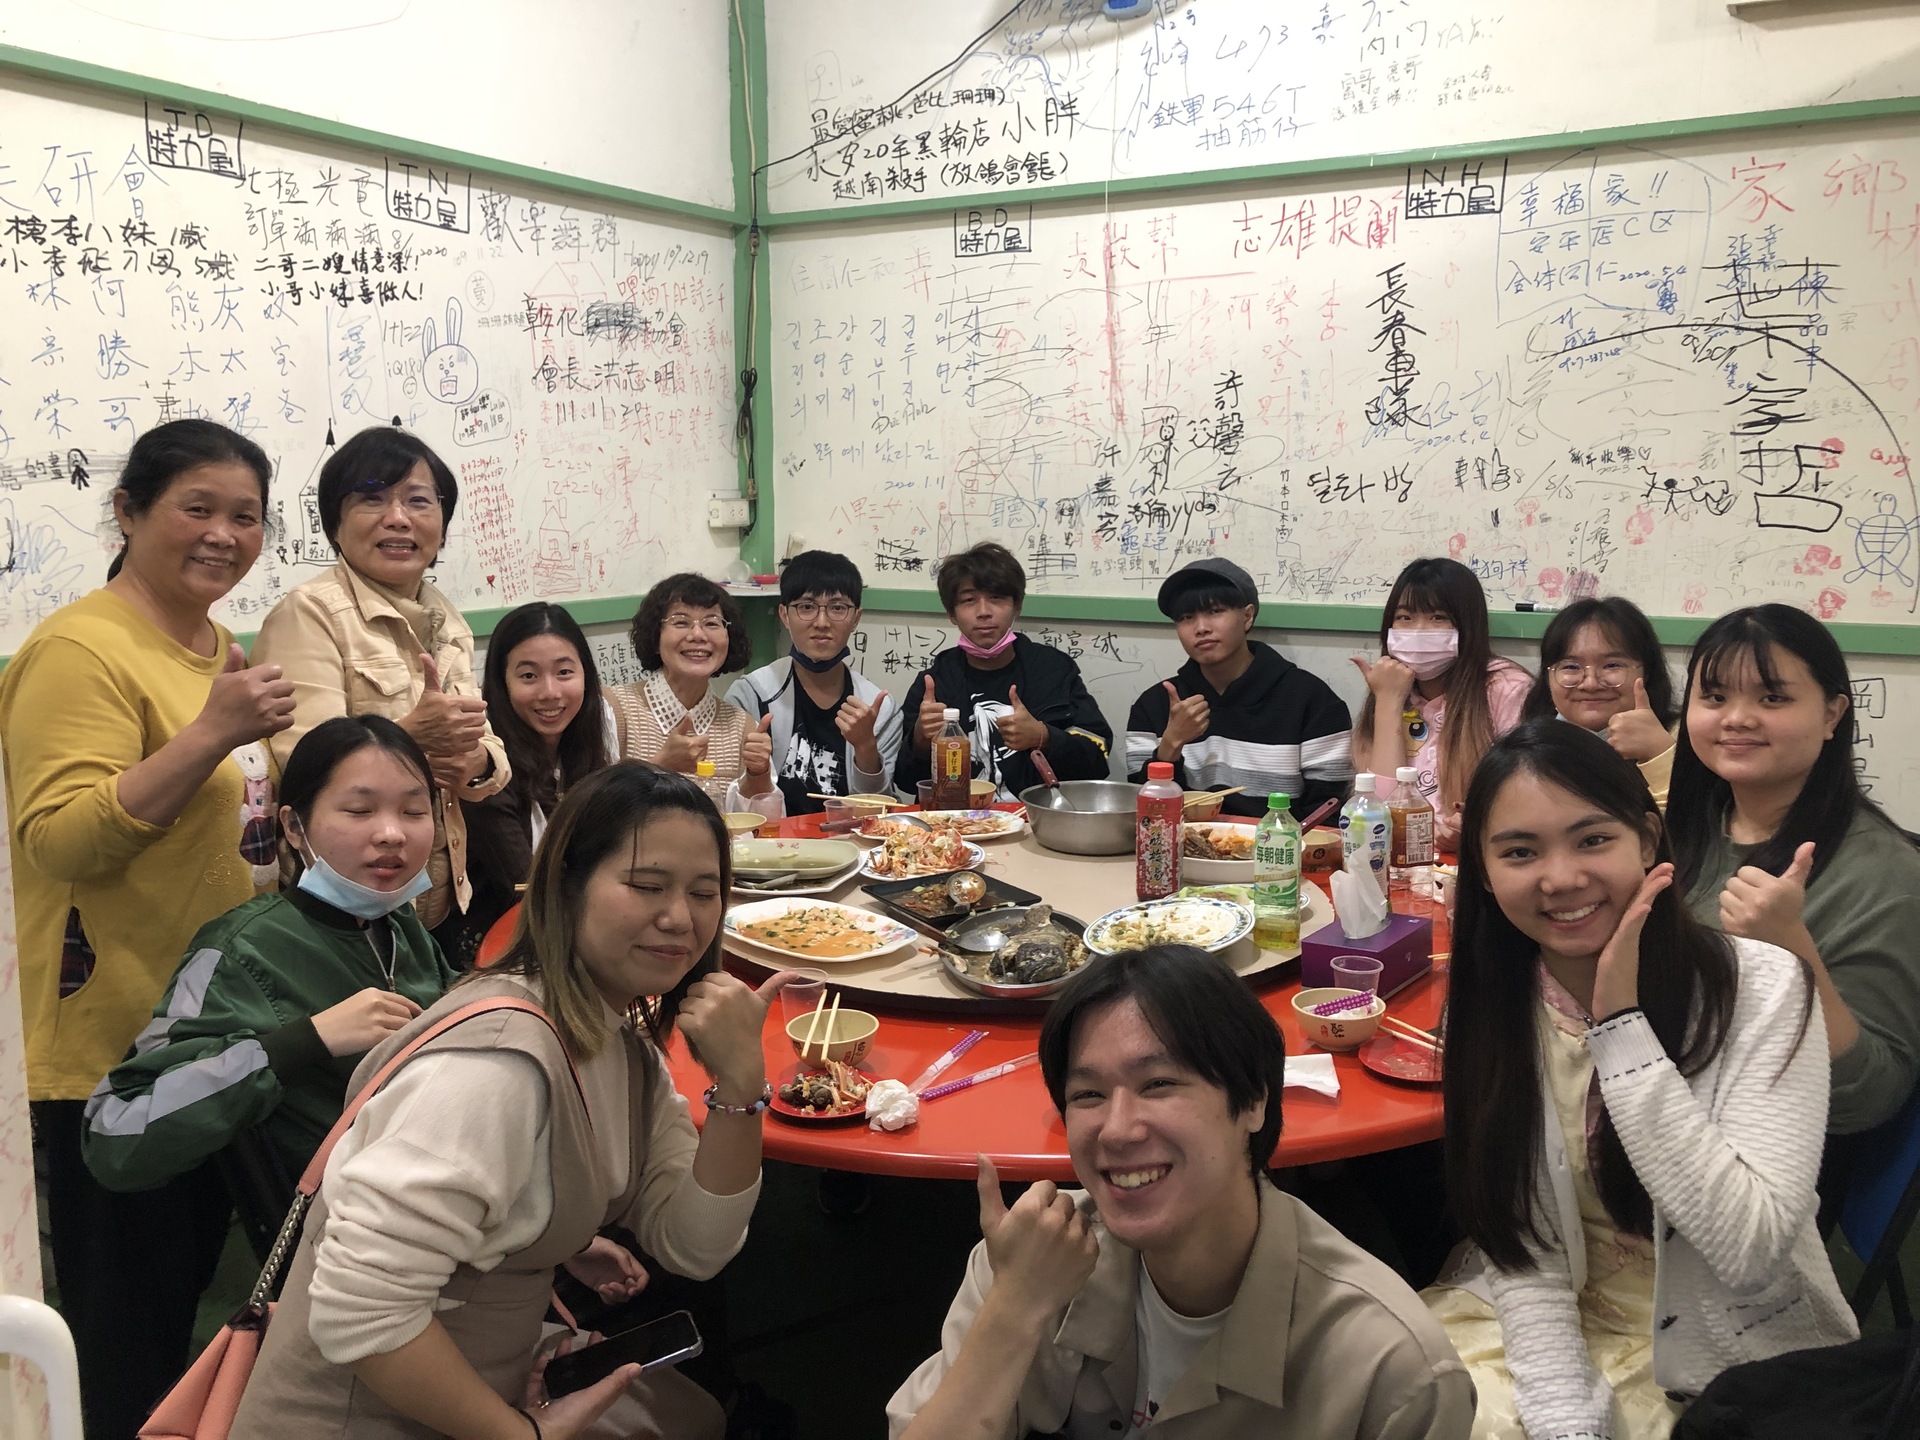 The president of NUK, Yueh-Tuan Chen (The 2nd from the left in the back row) and legislator, Shyh-Fang Liu (The 3rd from the left in the back row) made this group of overseas students not feel lonely.